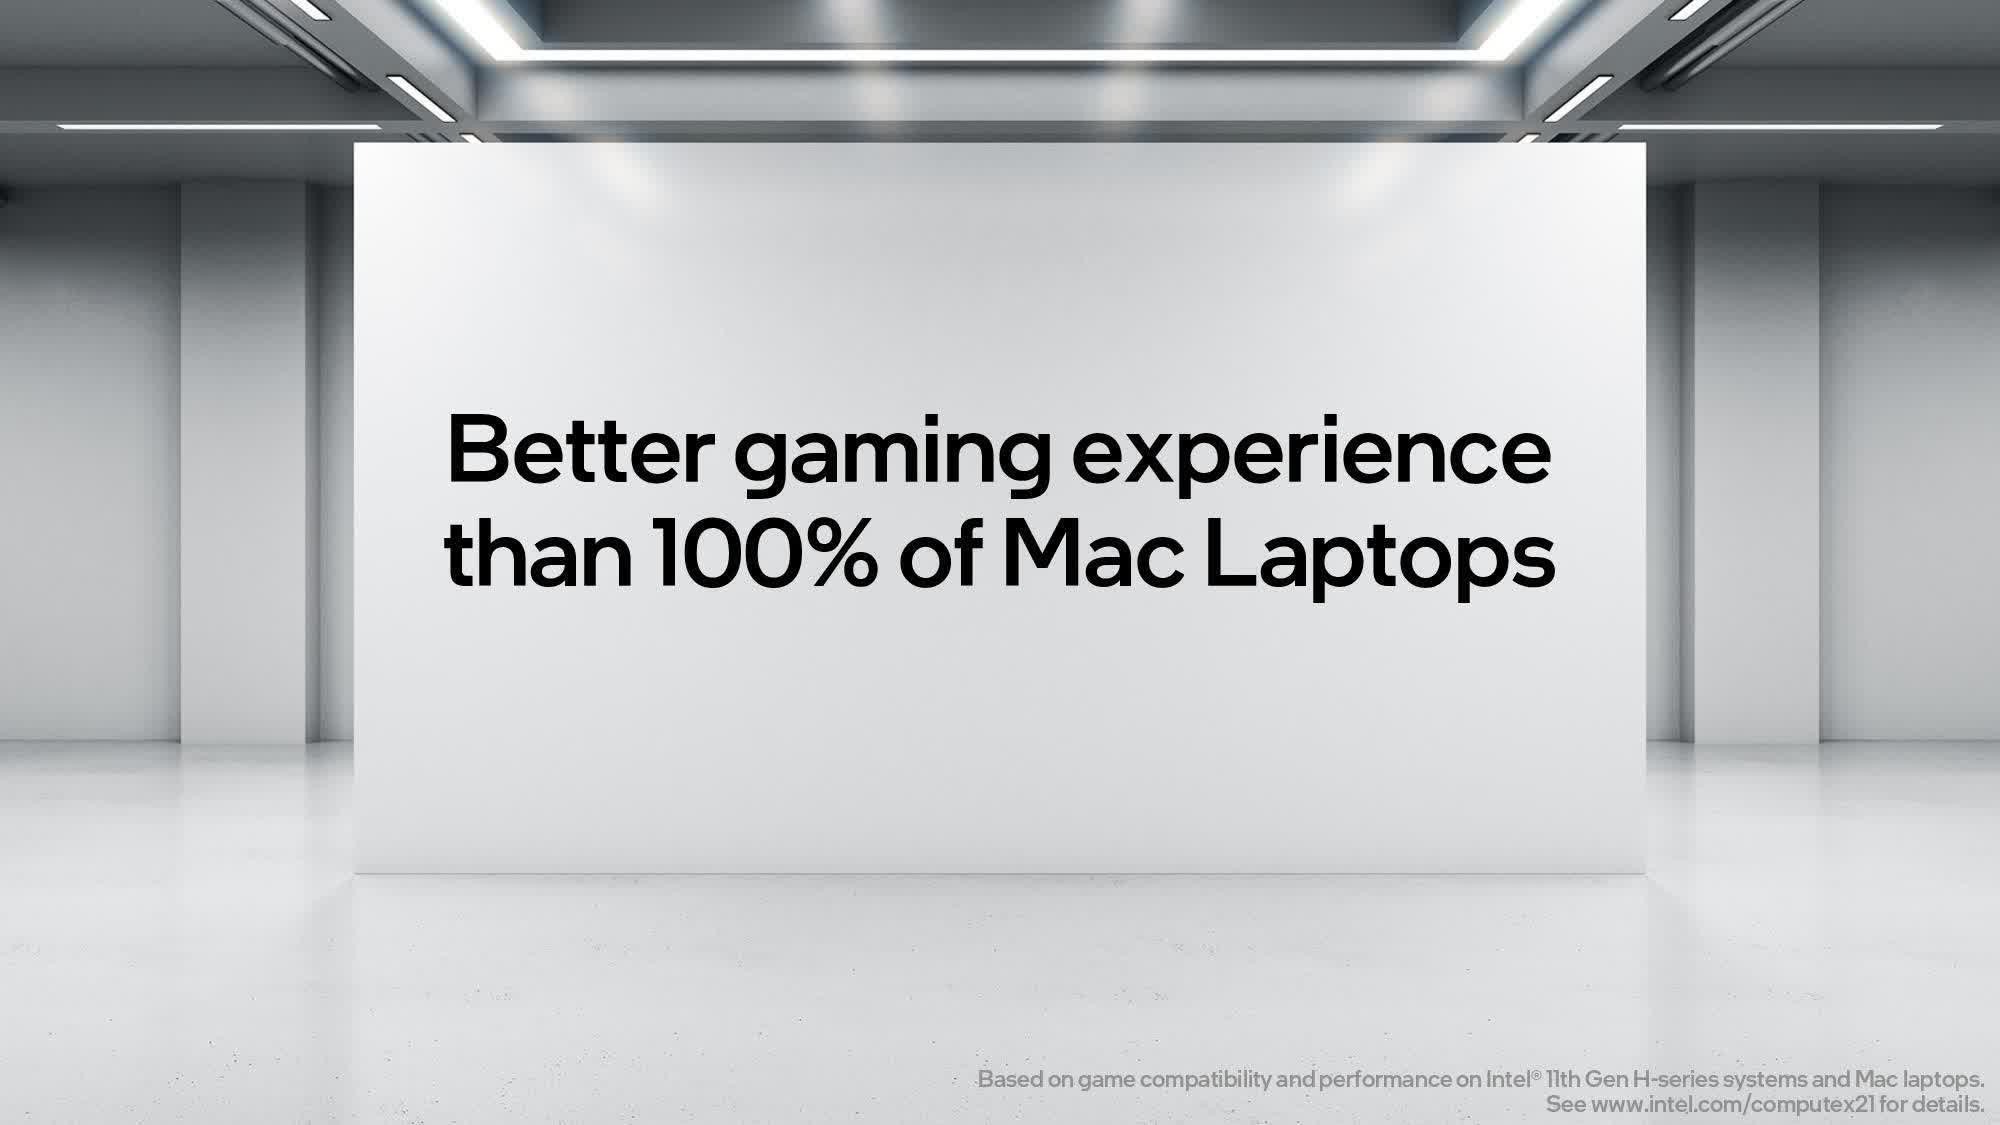 Intel says it provides a better gaming experience than 100% of Mac laptops